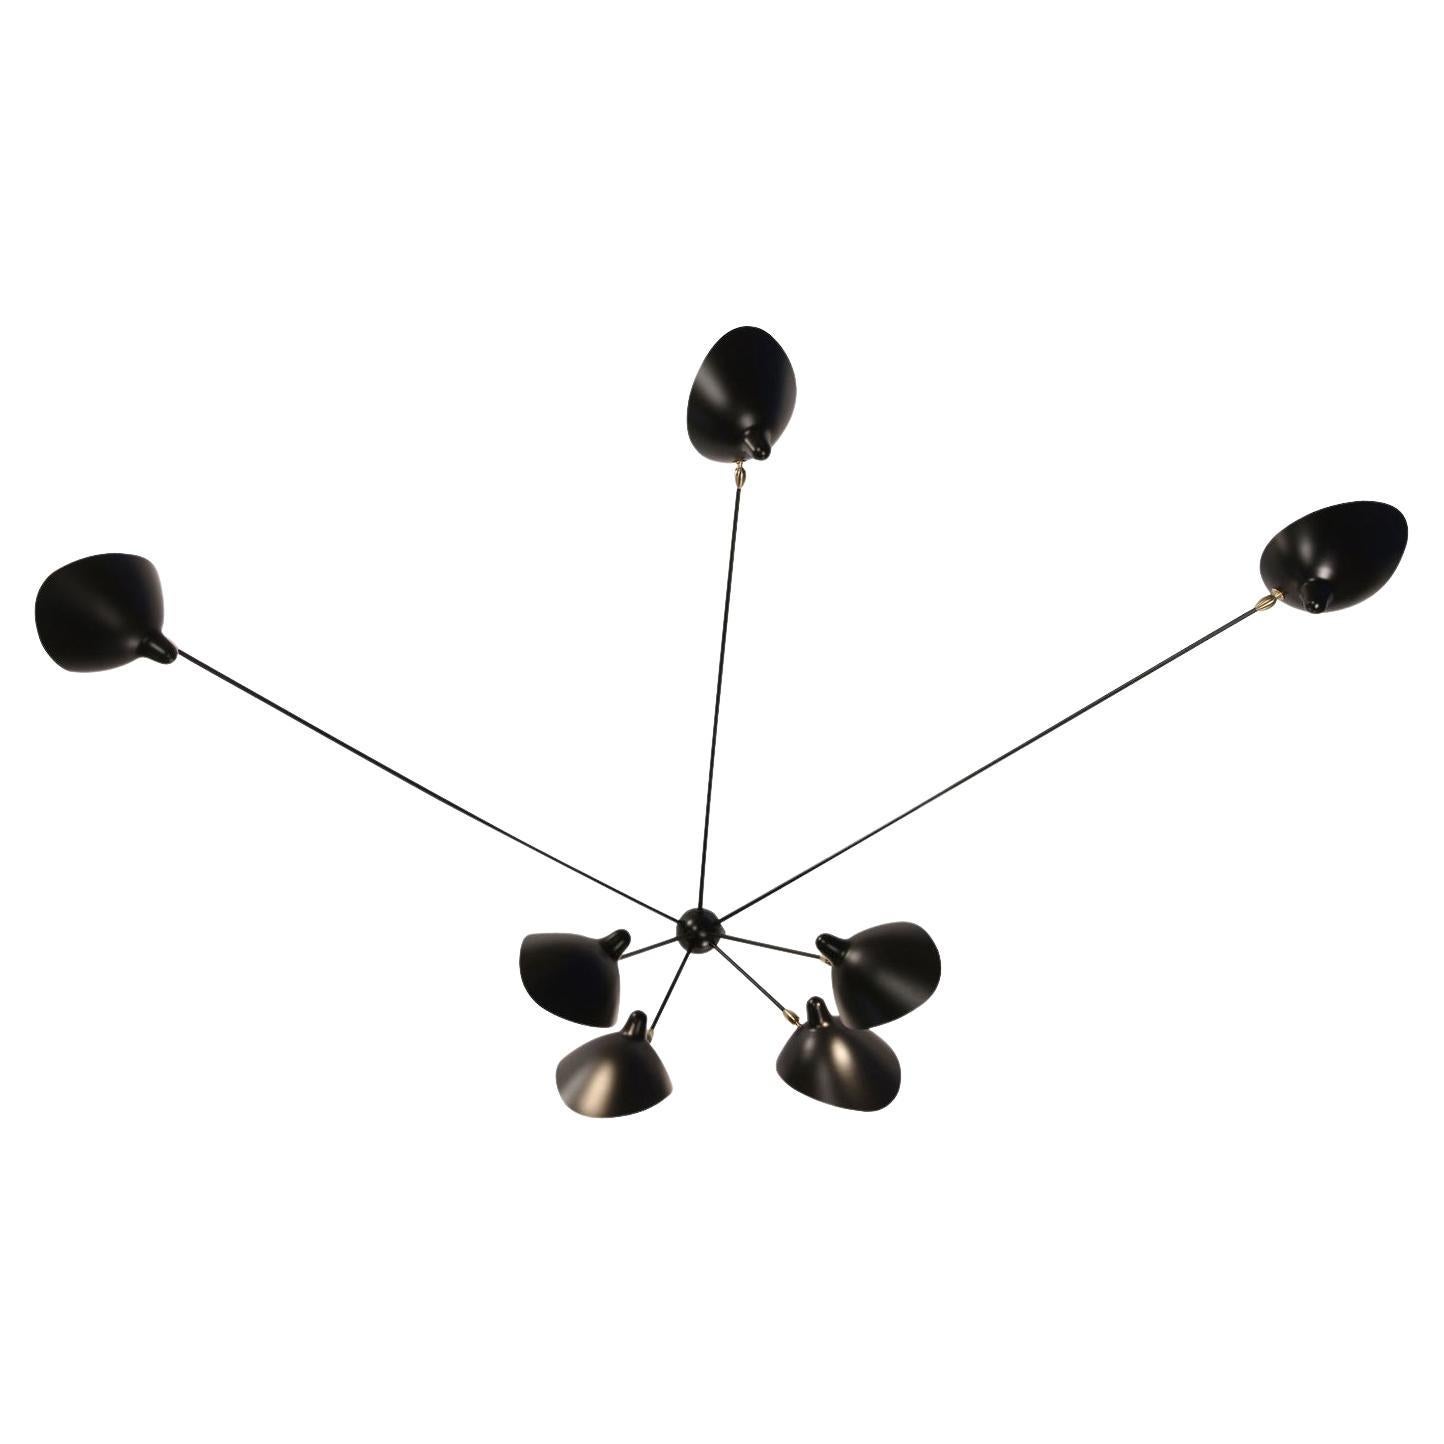 Serge Mouille - Spider Sconce with 7 Arms in Black or White For Sale